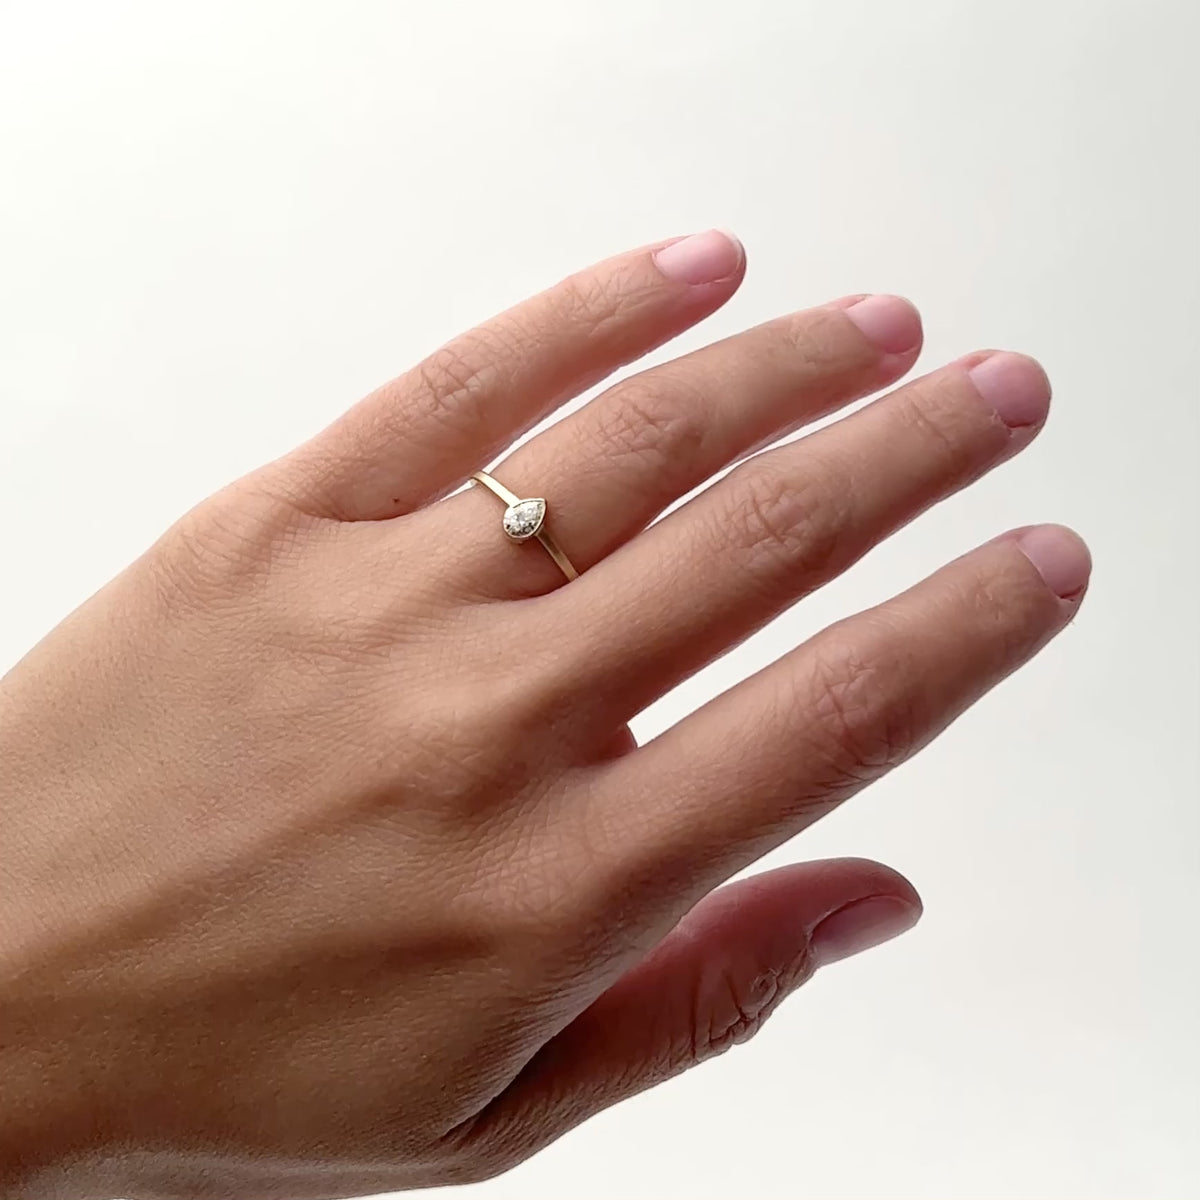 A model wears a narrow 14k yellow gold band with a bezel set .25ct pear shaped lab grown white diamond set in the center. The round portion of the setting features a cut-out. Designed and handcrafted in Portland, Oregon.